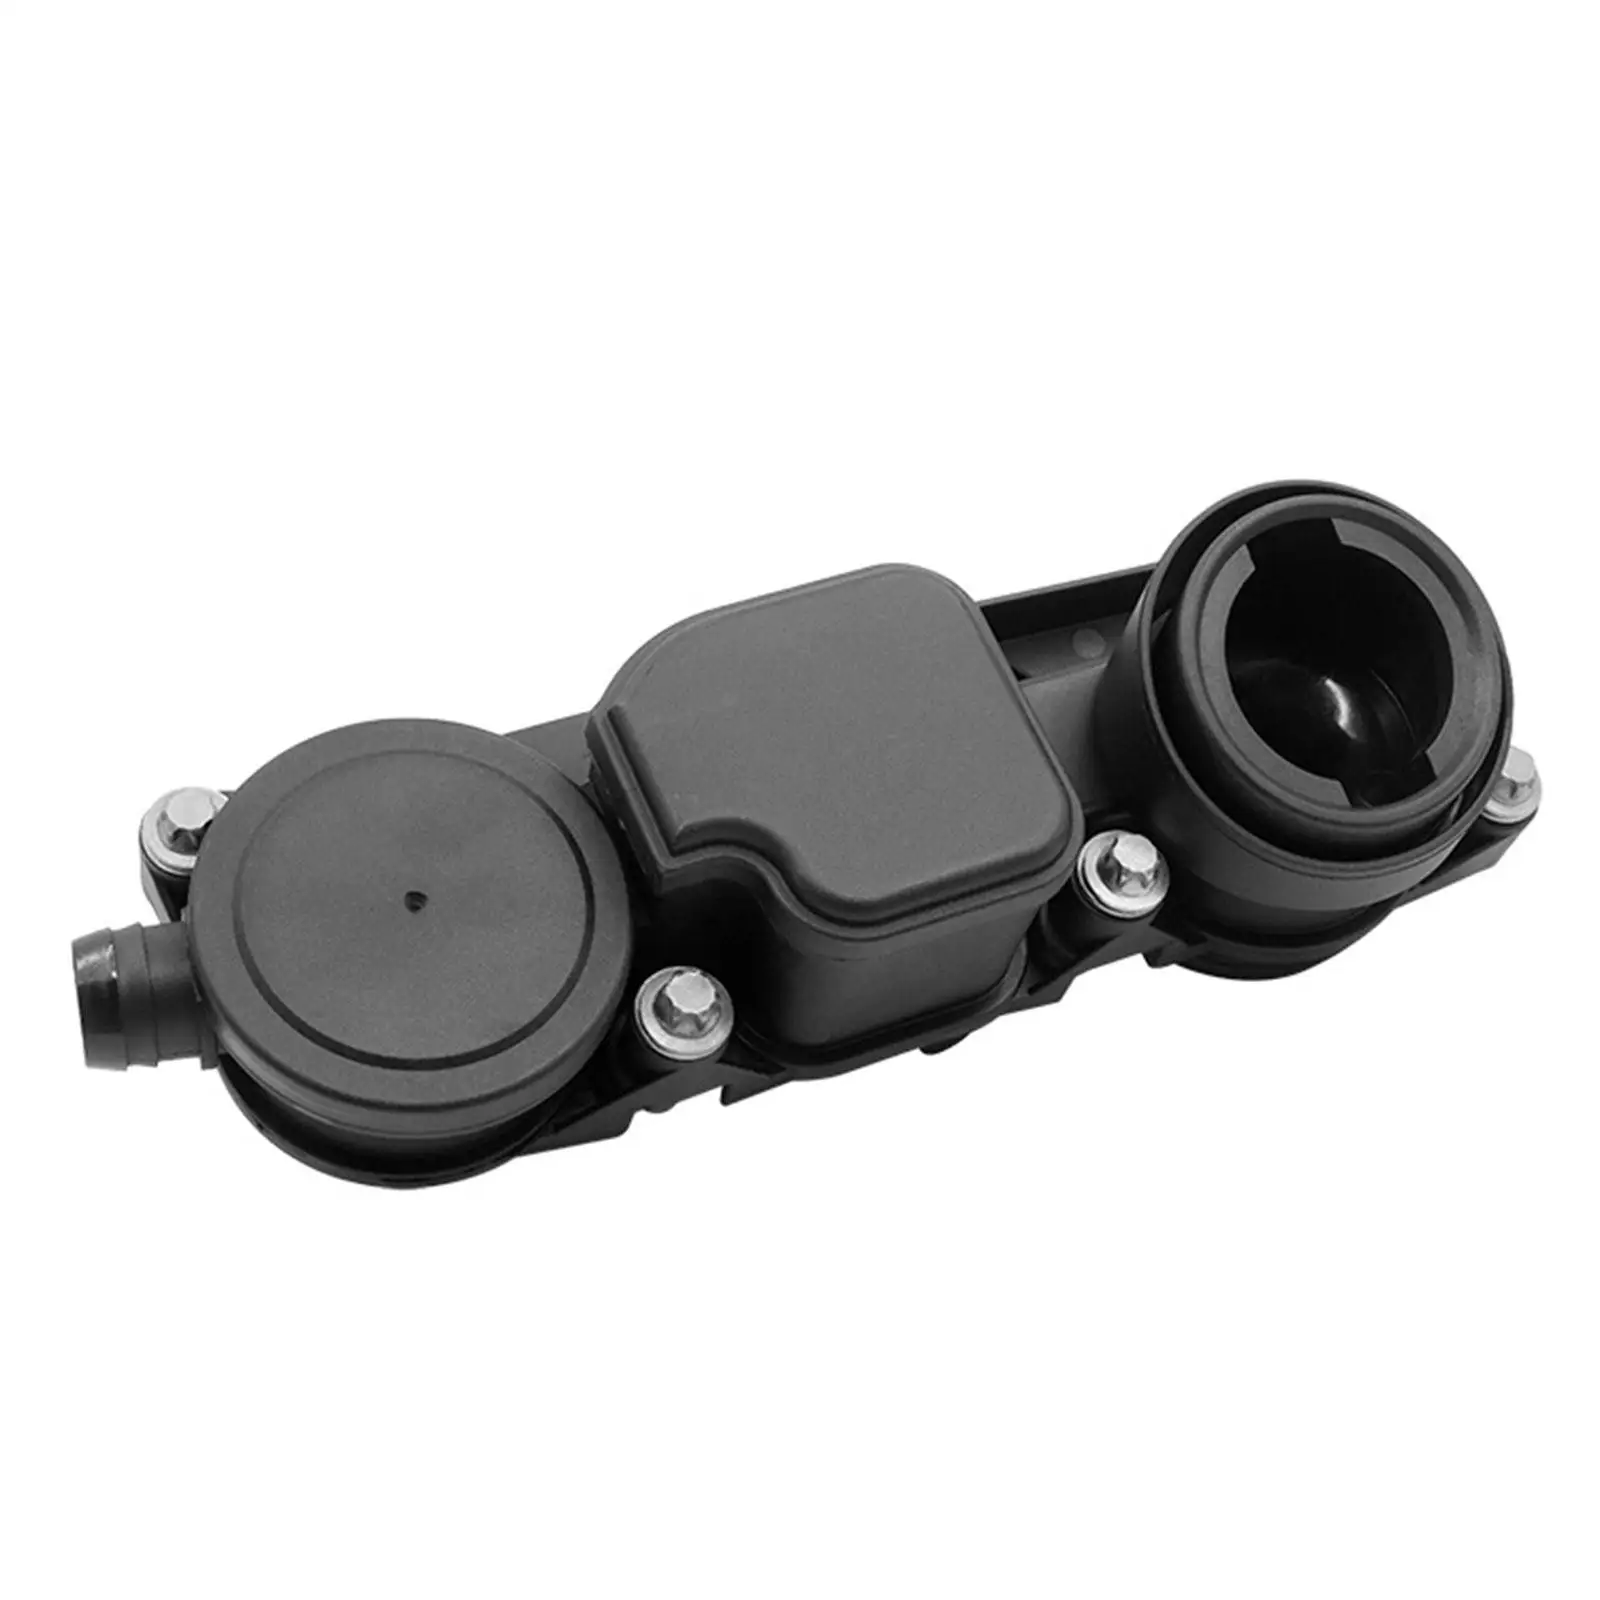 Oil Separator Crankcase Breather Replaces for Mercedes-Benz CL203 W211